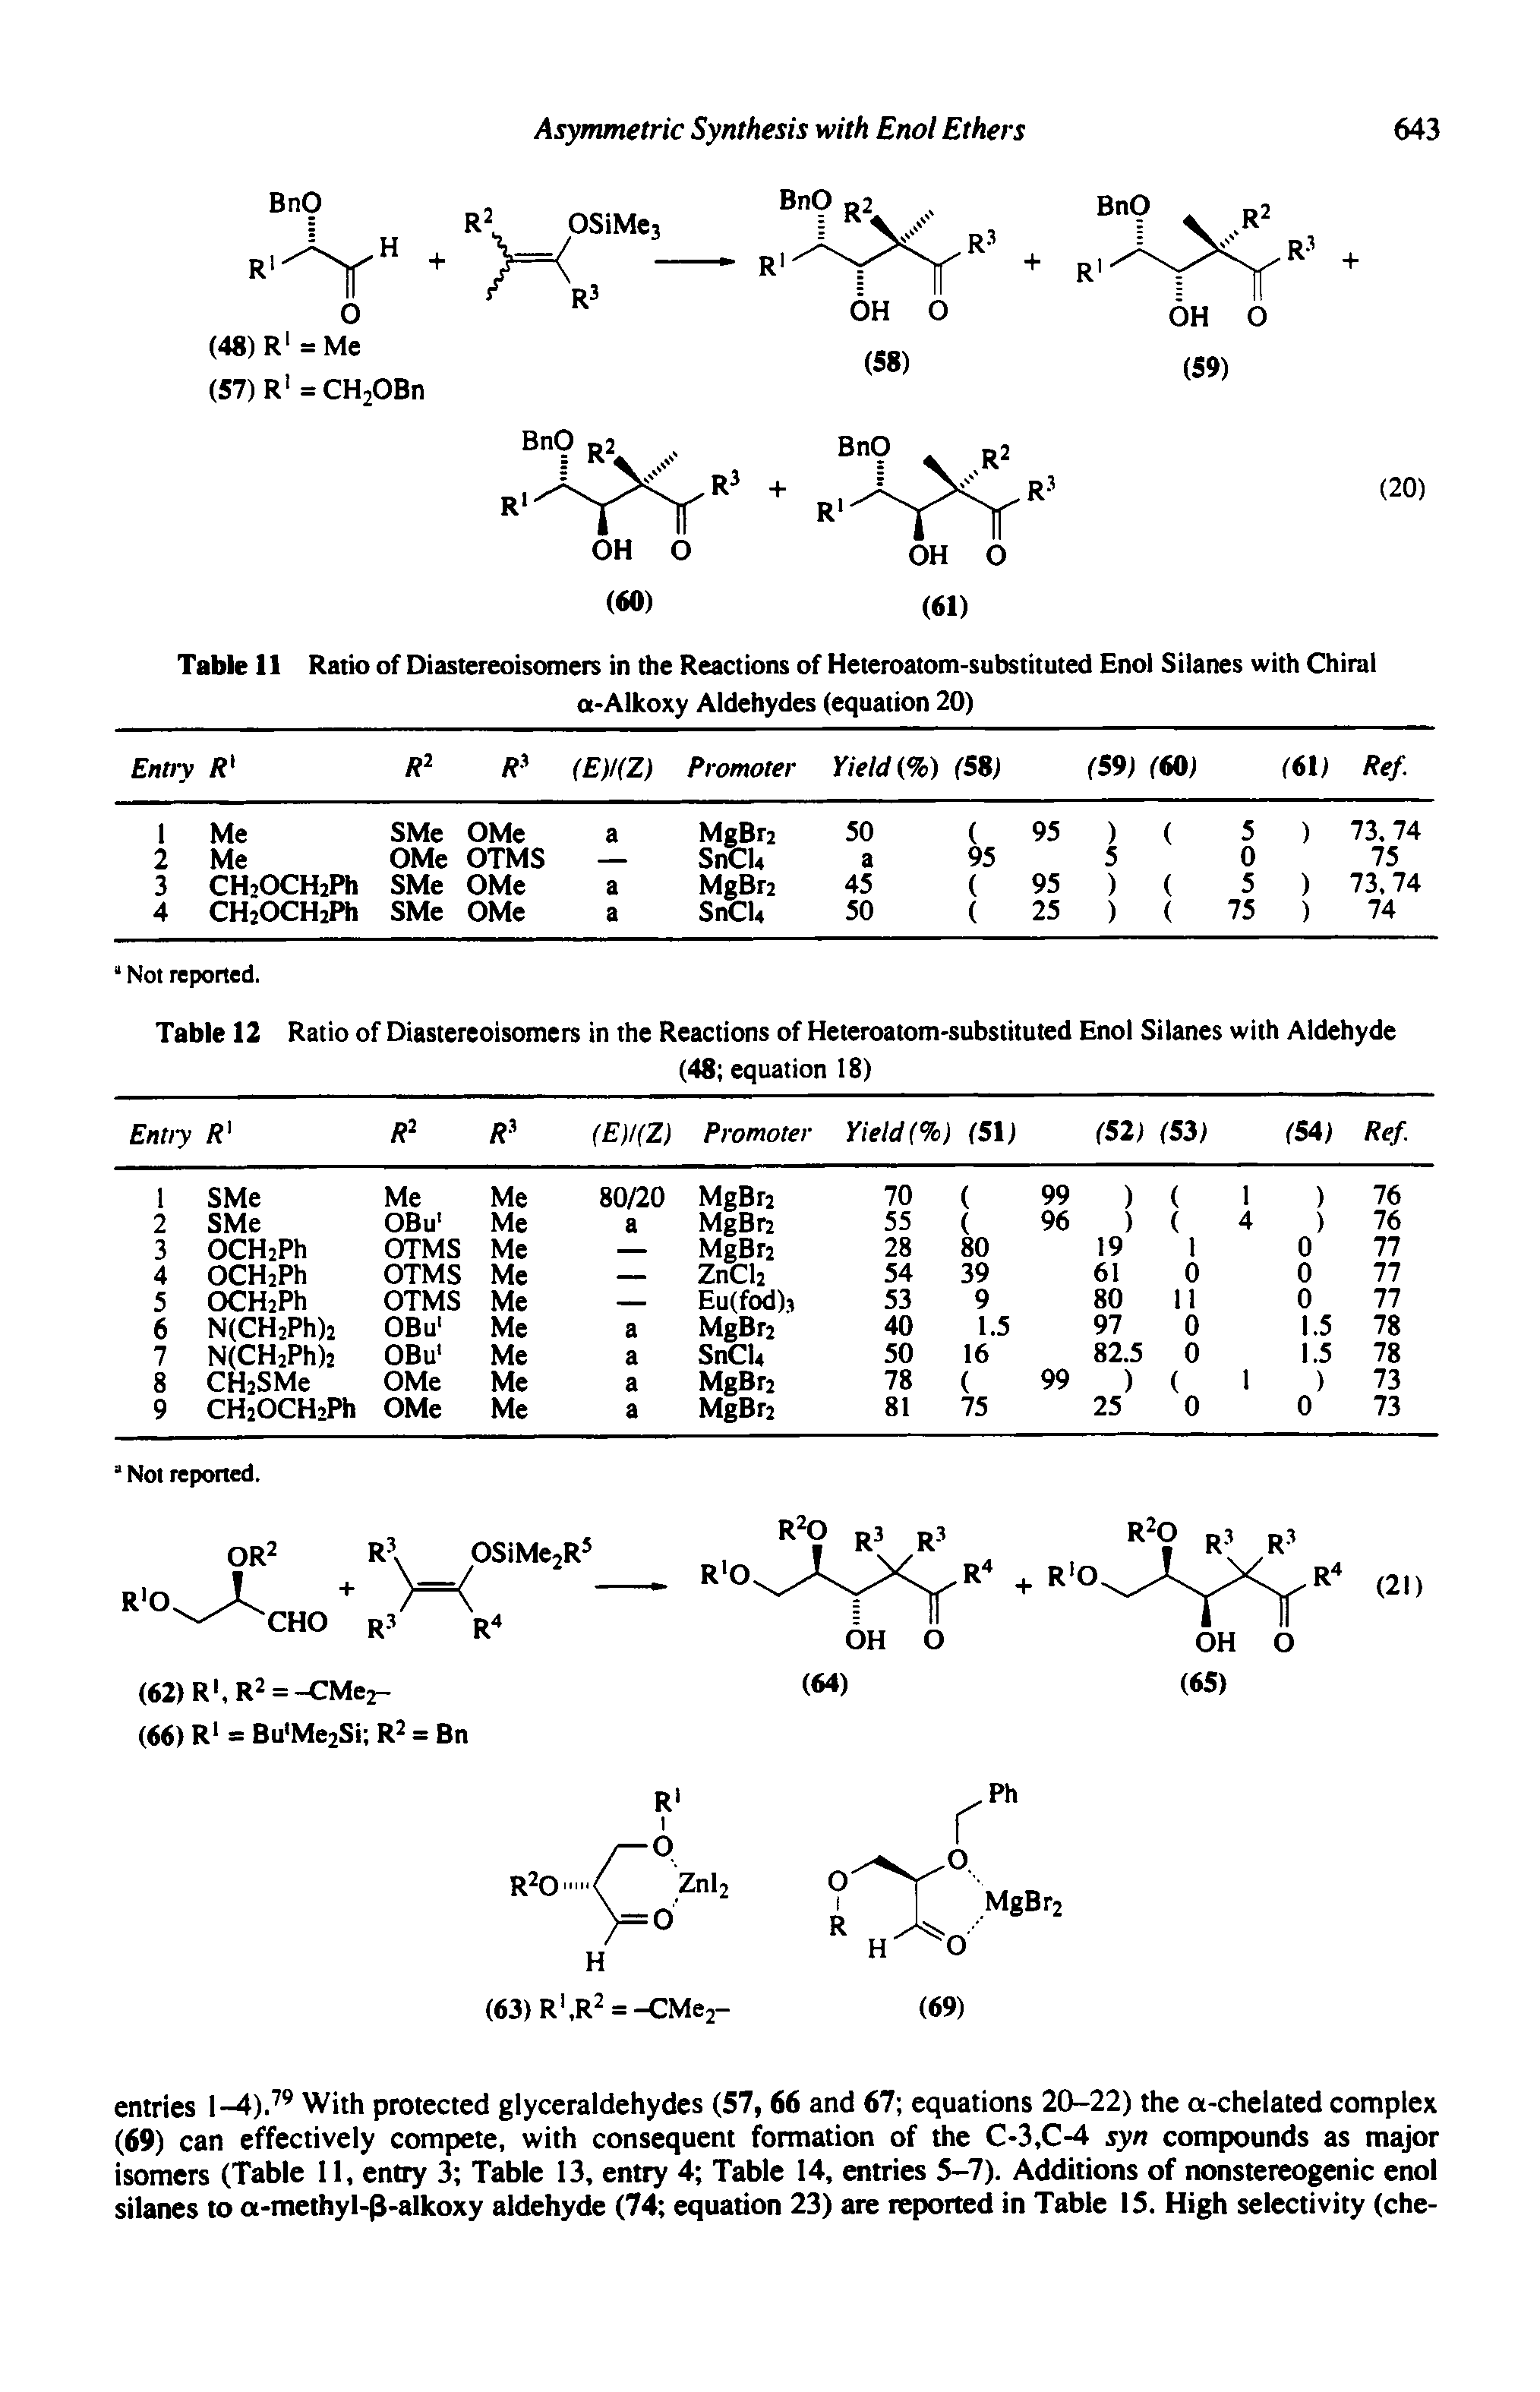 Table 11 Ratio of Diastereoisomers in the Reactions of Heteroatom-substituted Enol Silanes with Chiral...